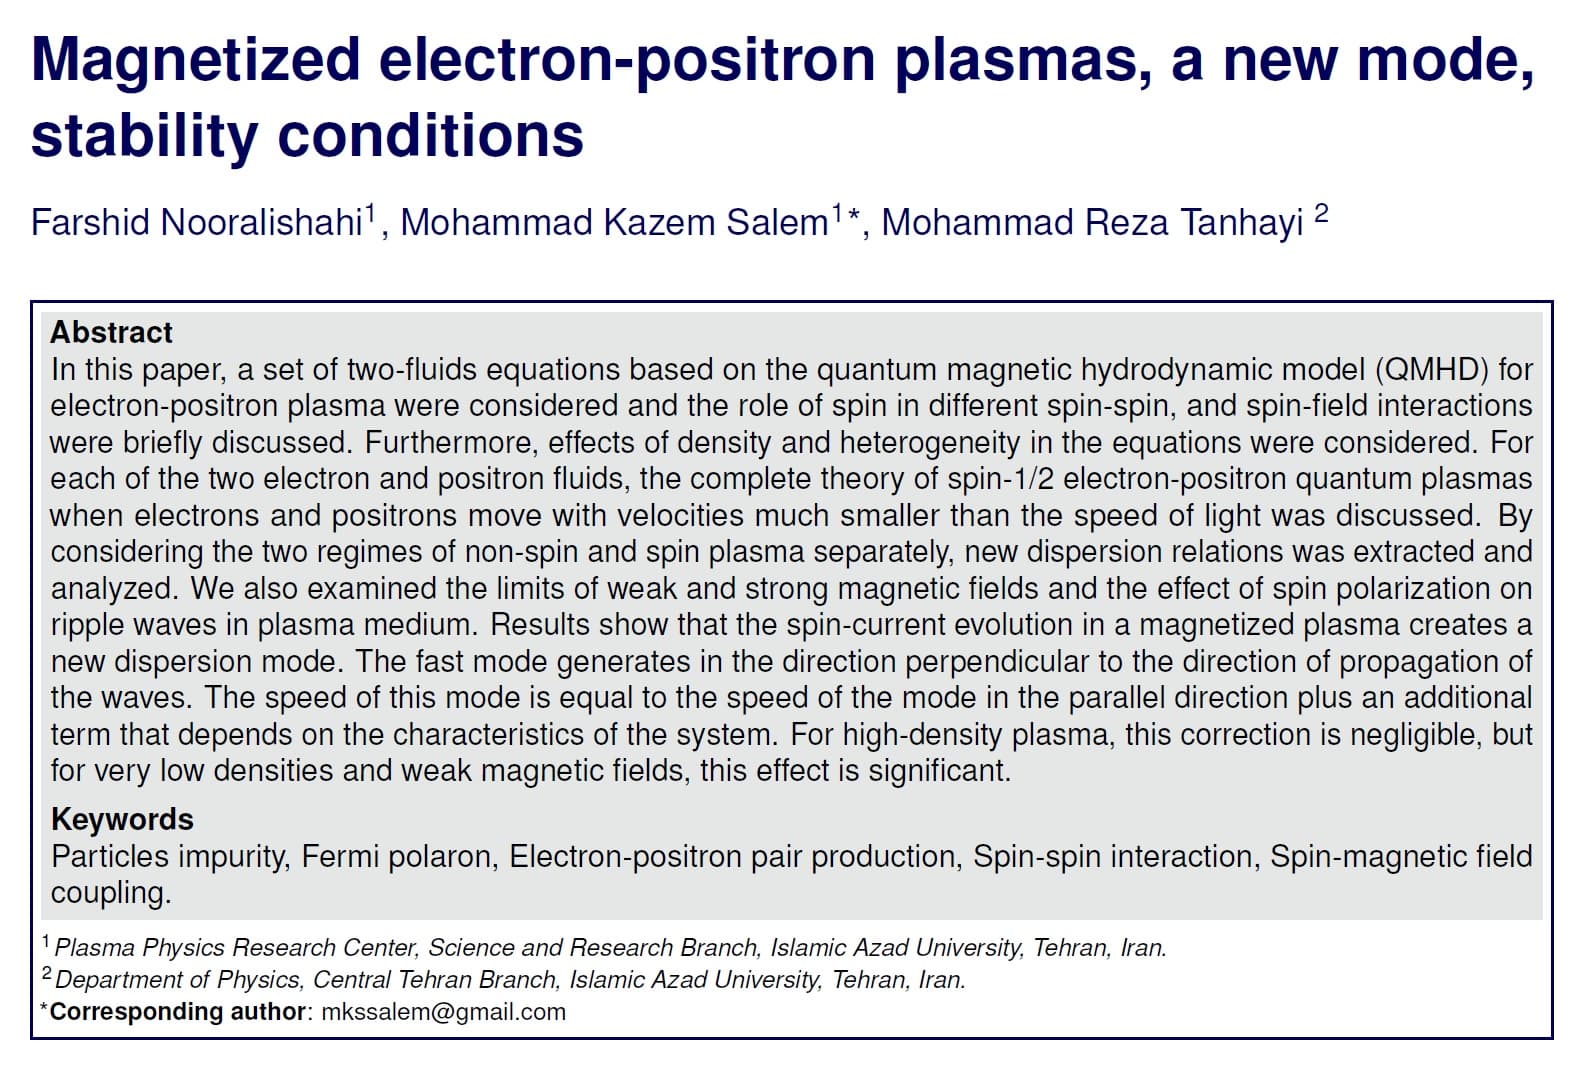 Magnetized electron-positron plasma, new mode, stability conditions